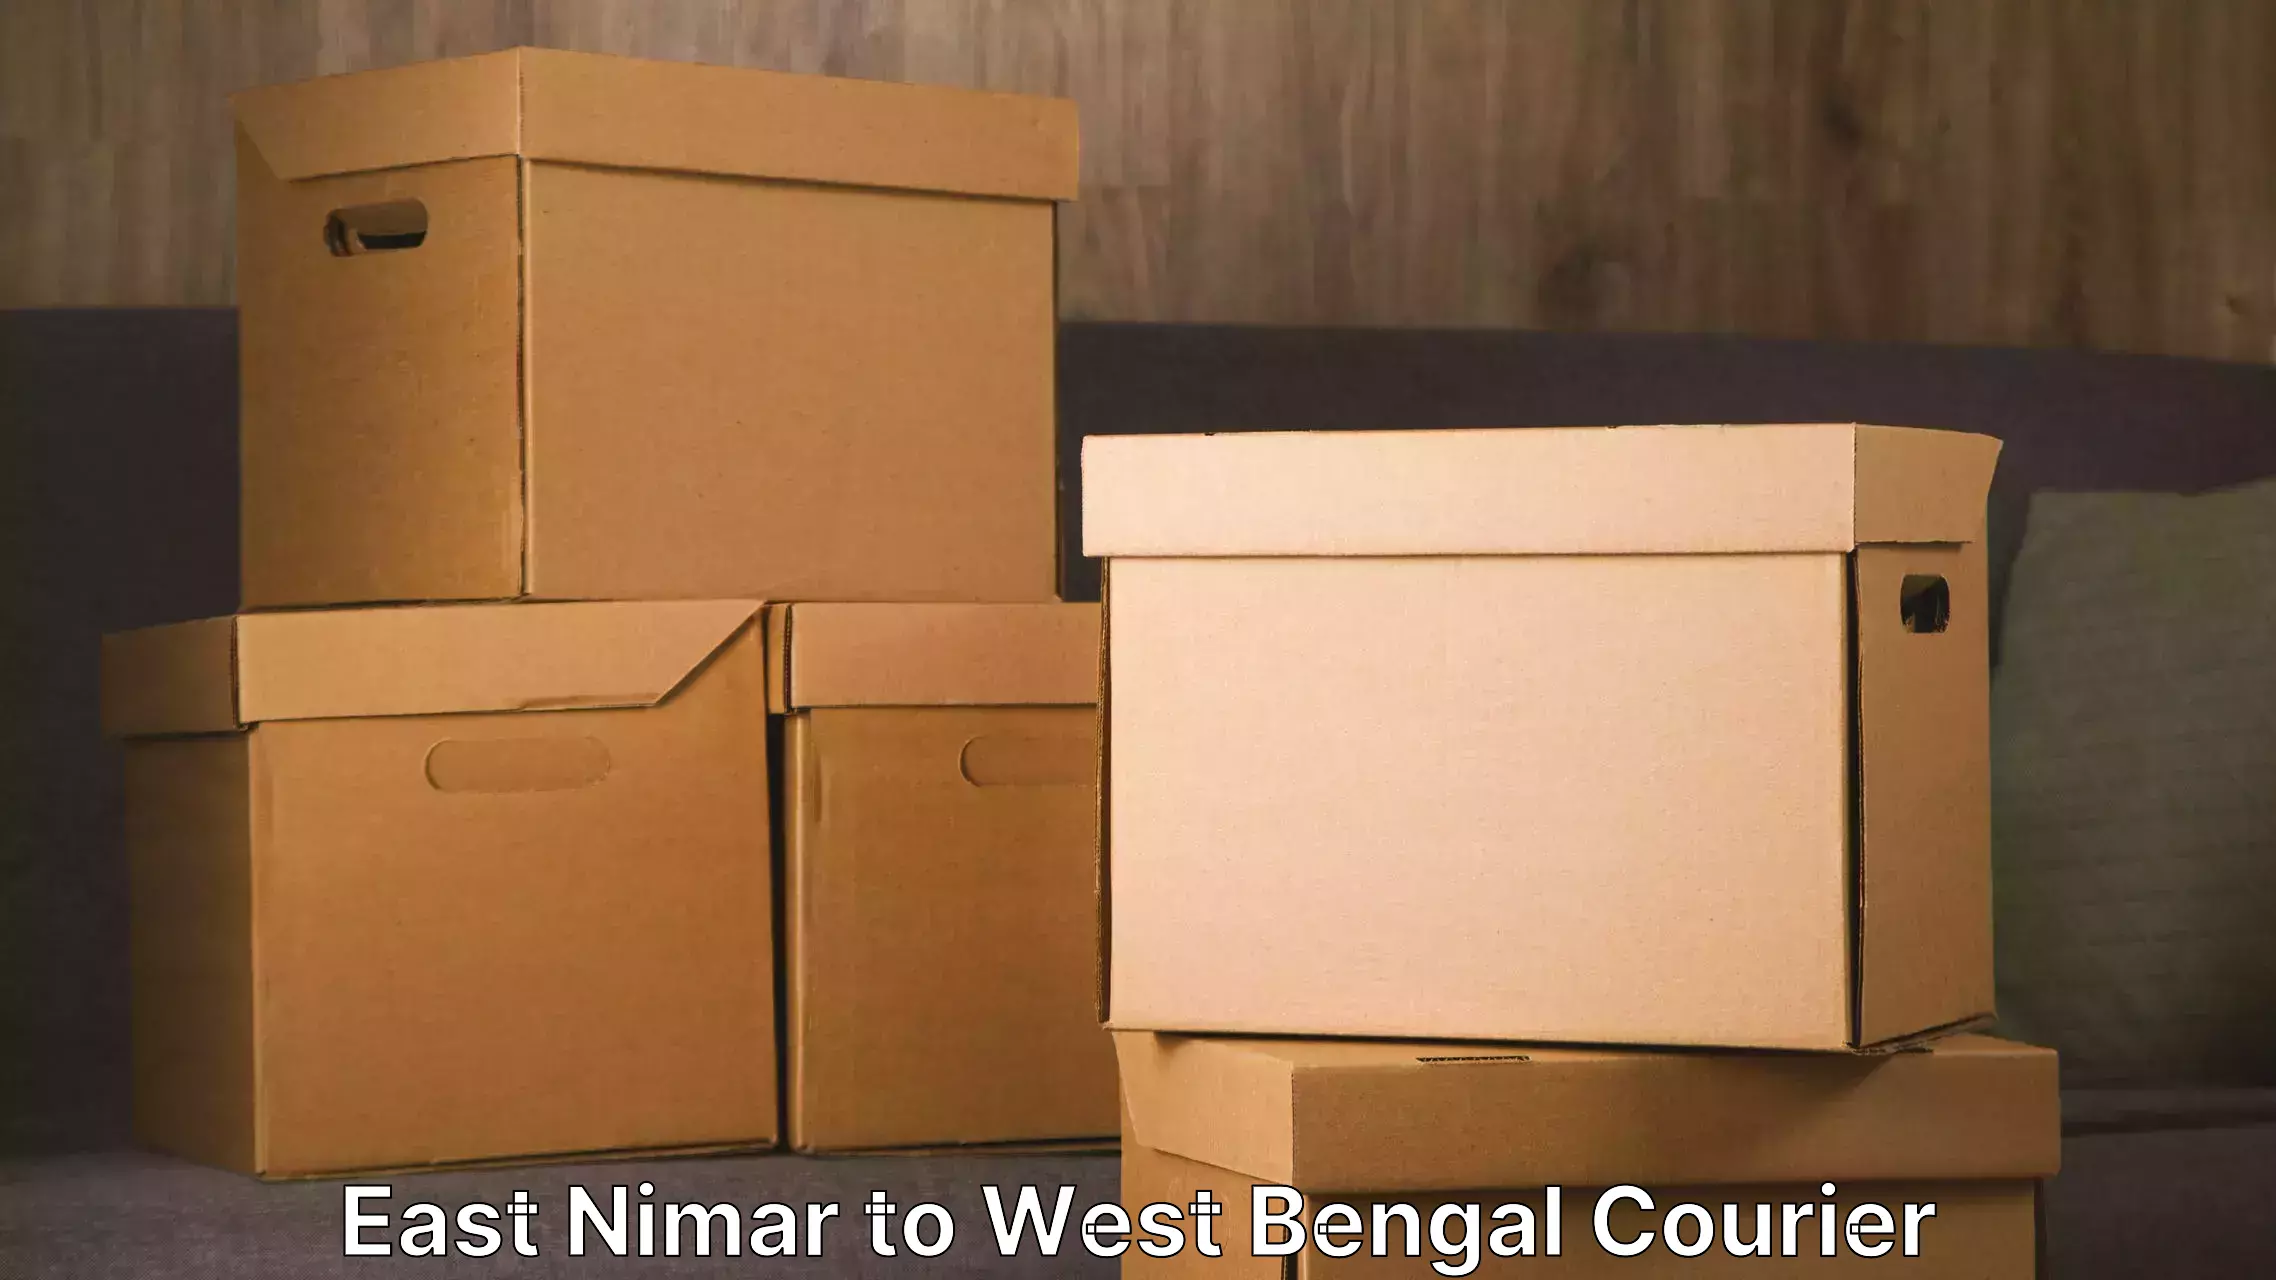 Trusted relocation experts East Nimar to Manteswar